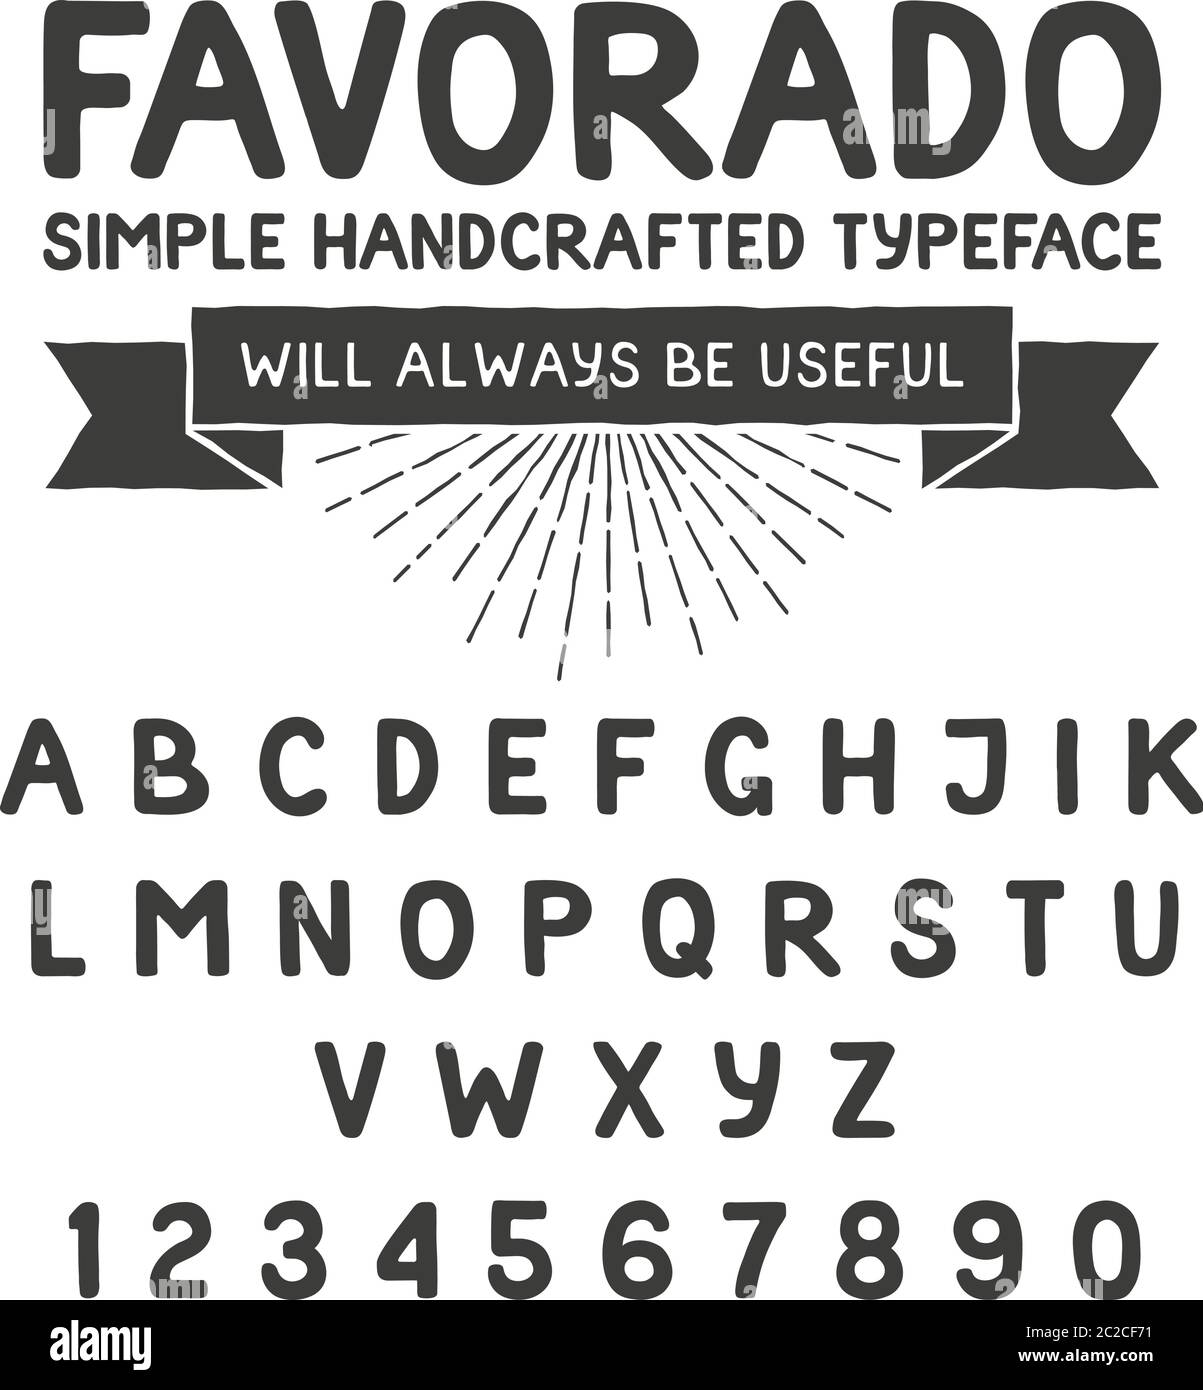 Simple handcrafted typeface, alphabet Stock Vector